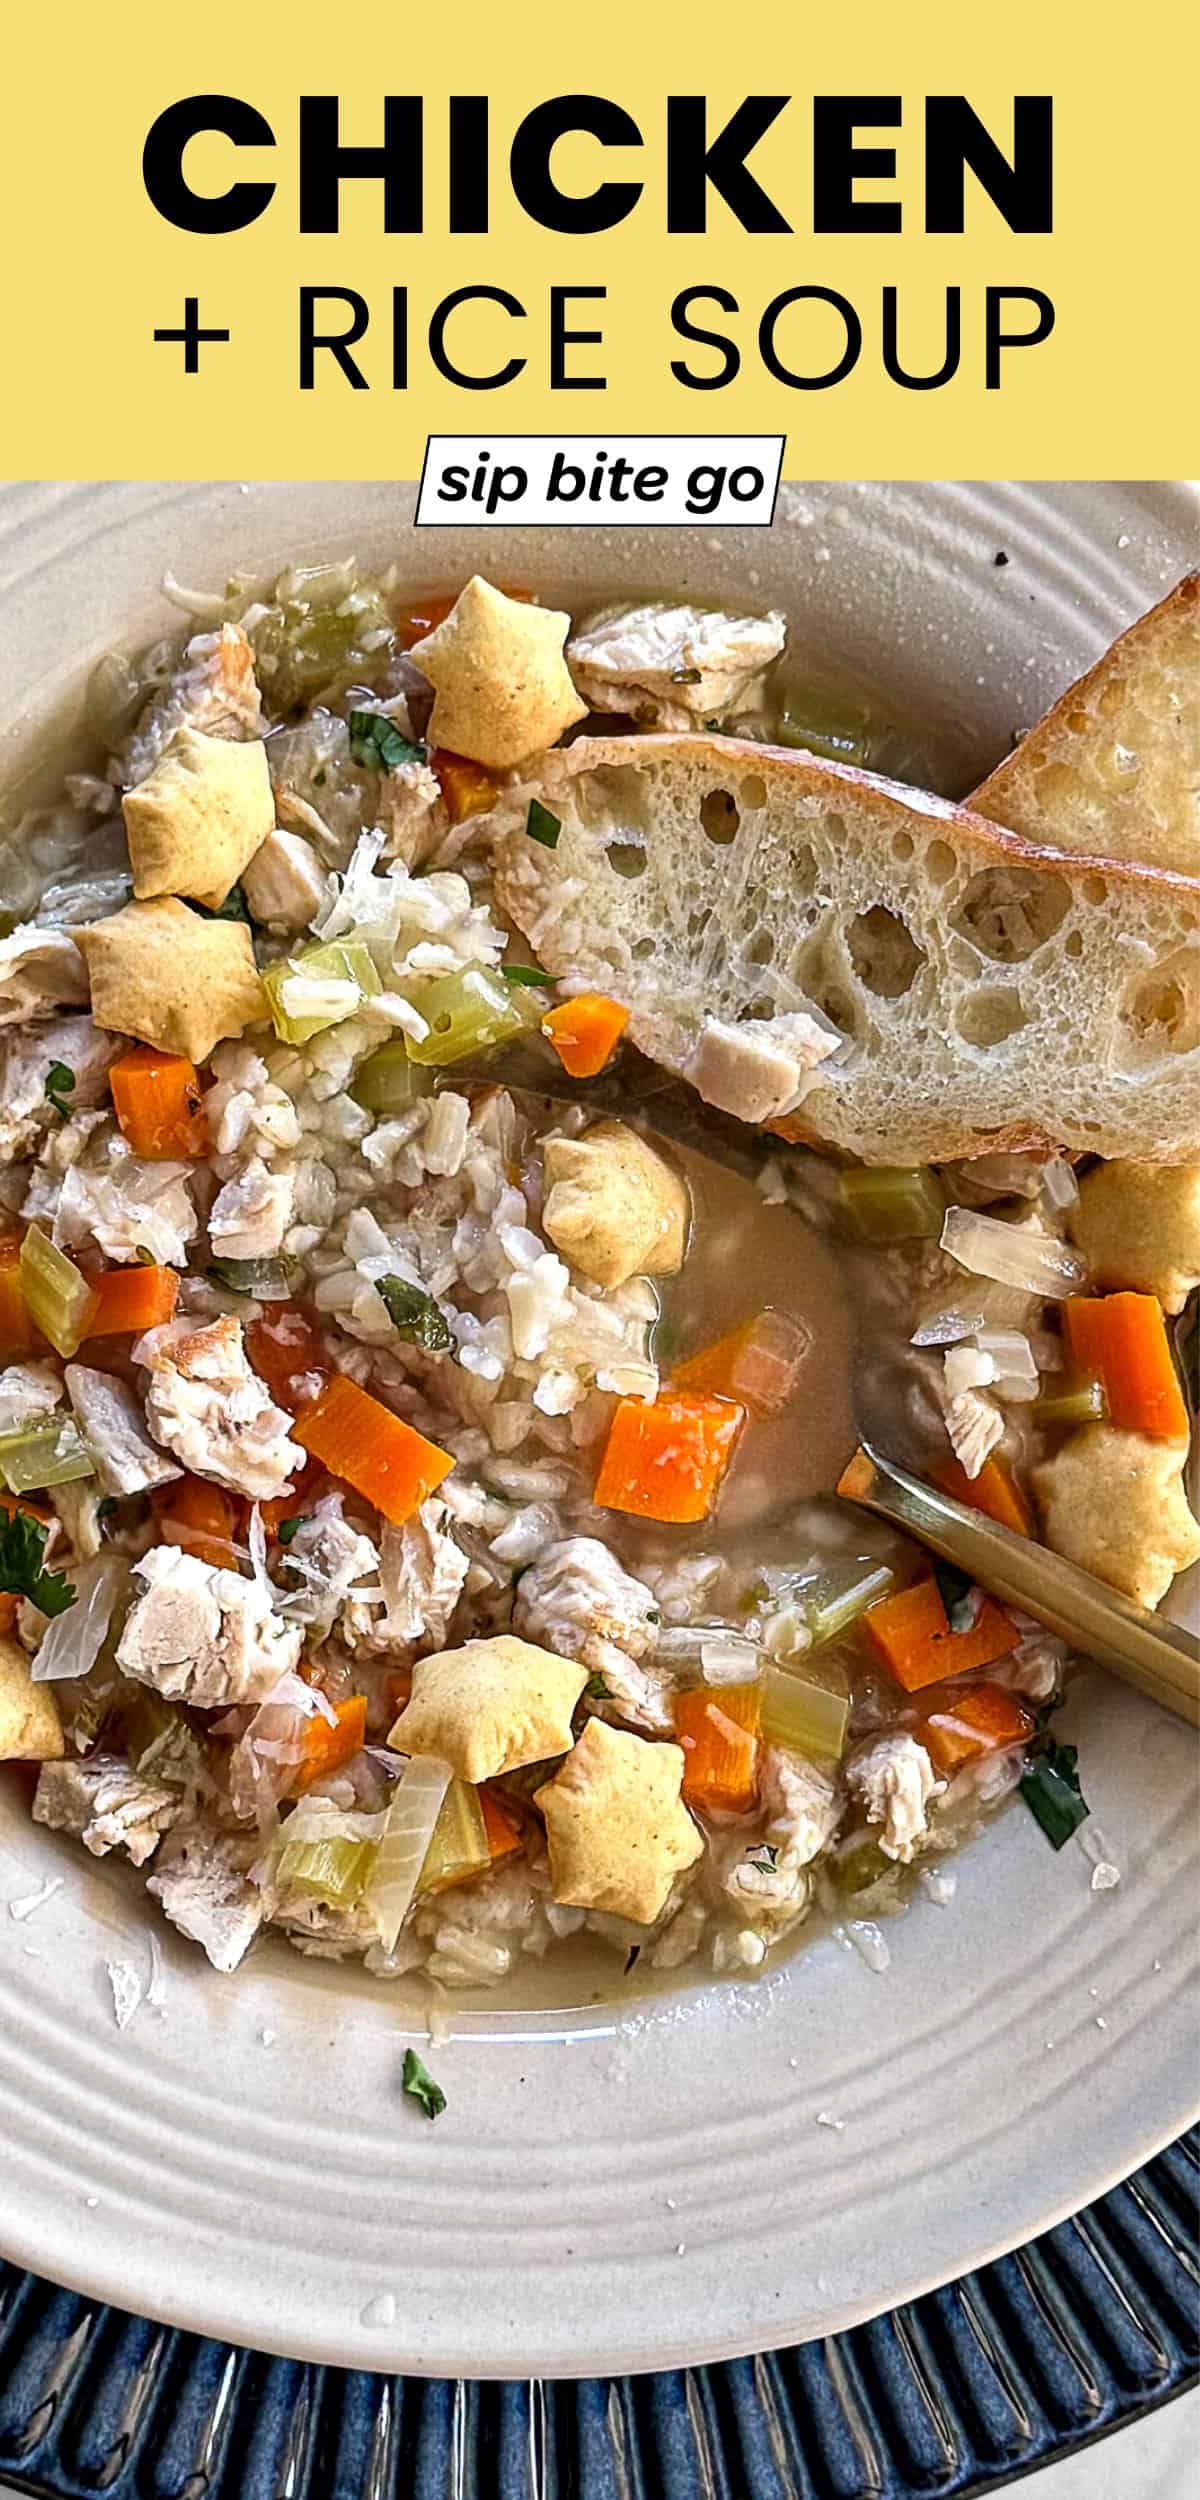 Chicken and Rice Soup with text overlay